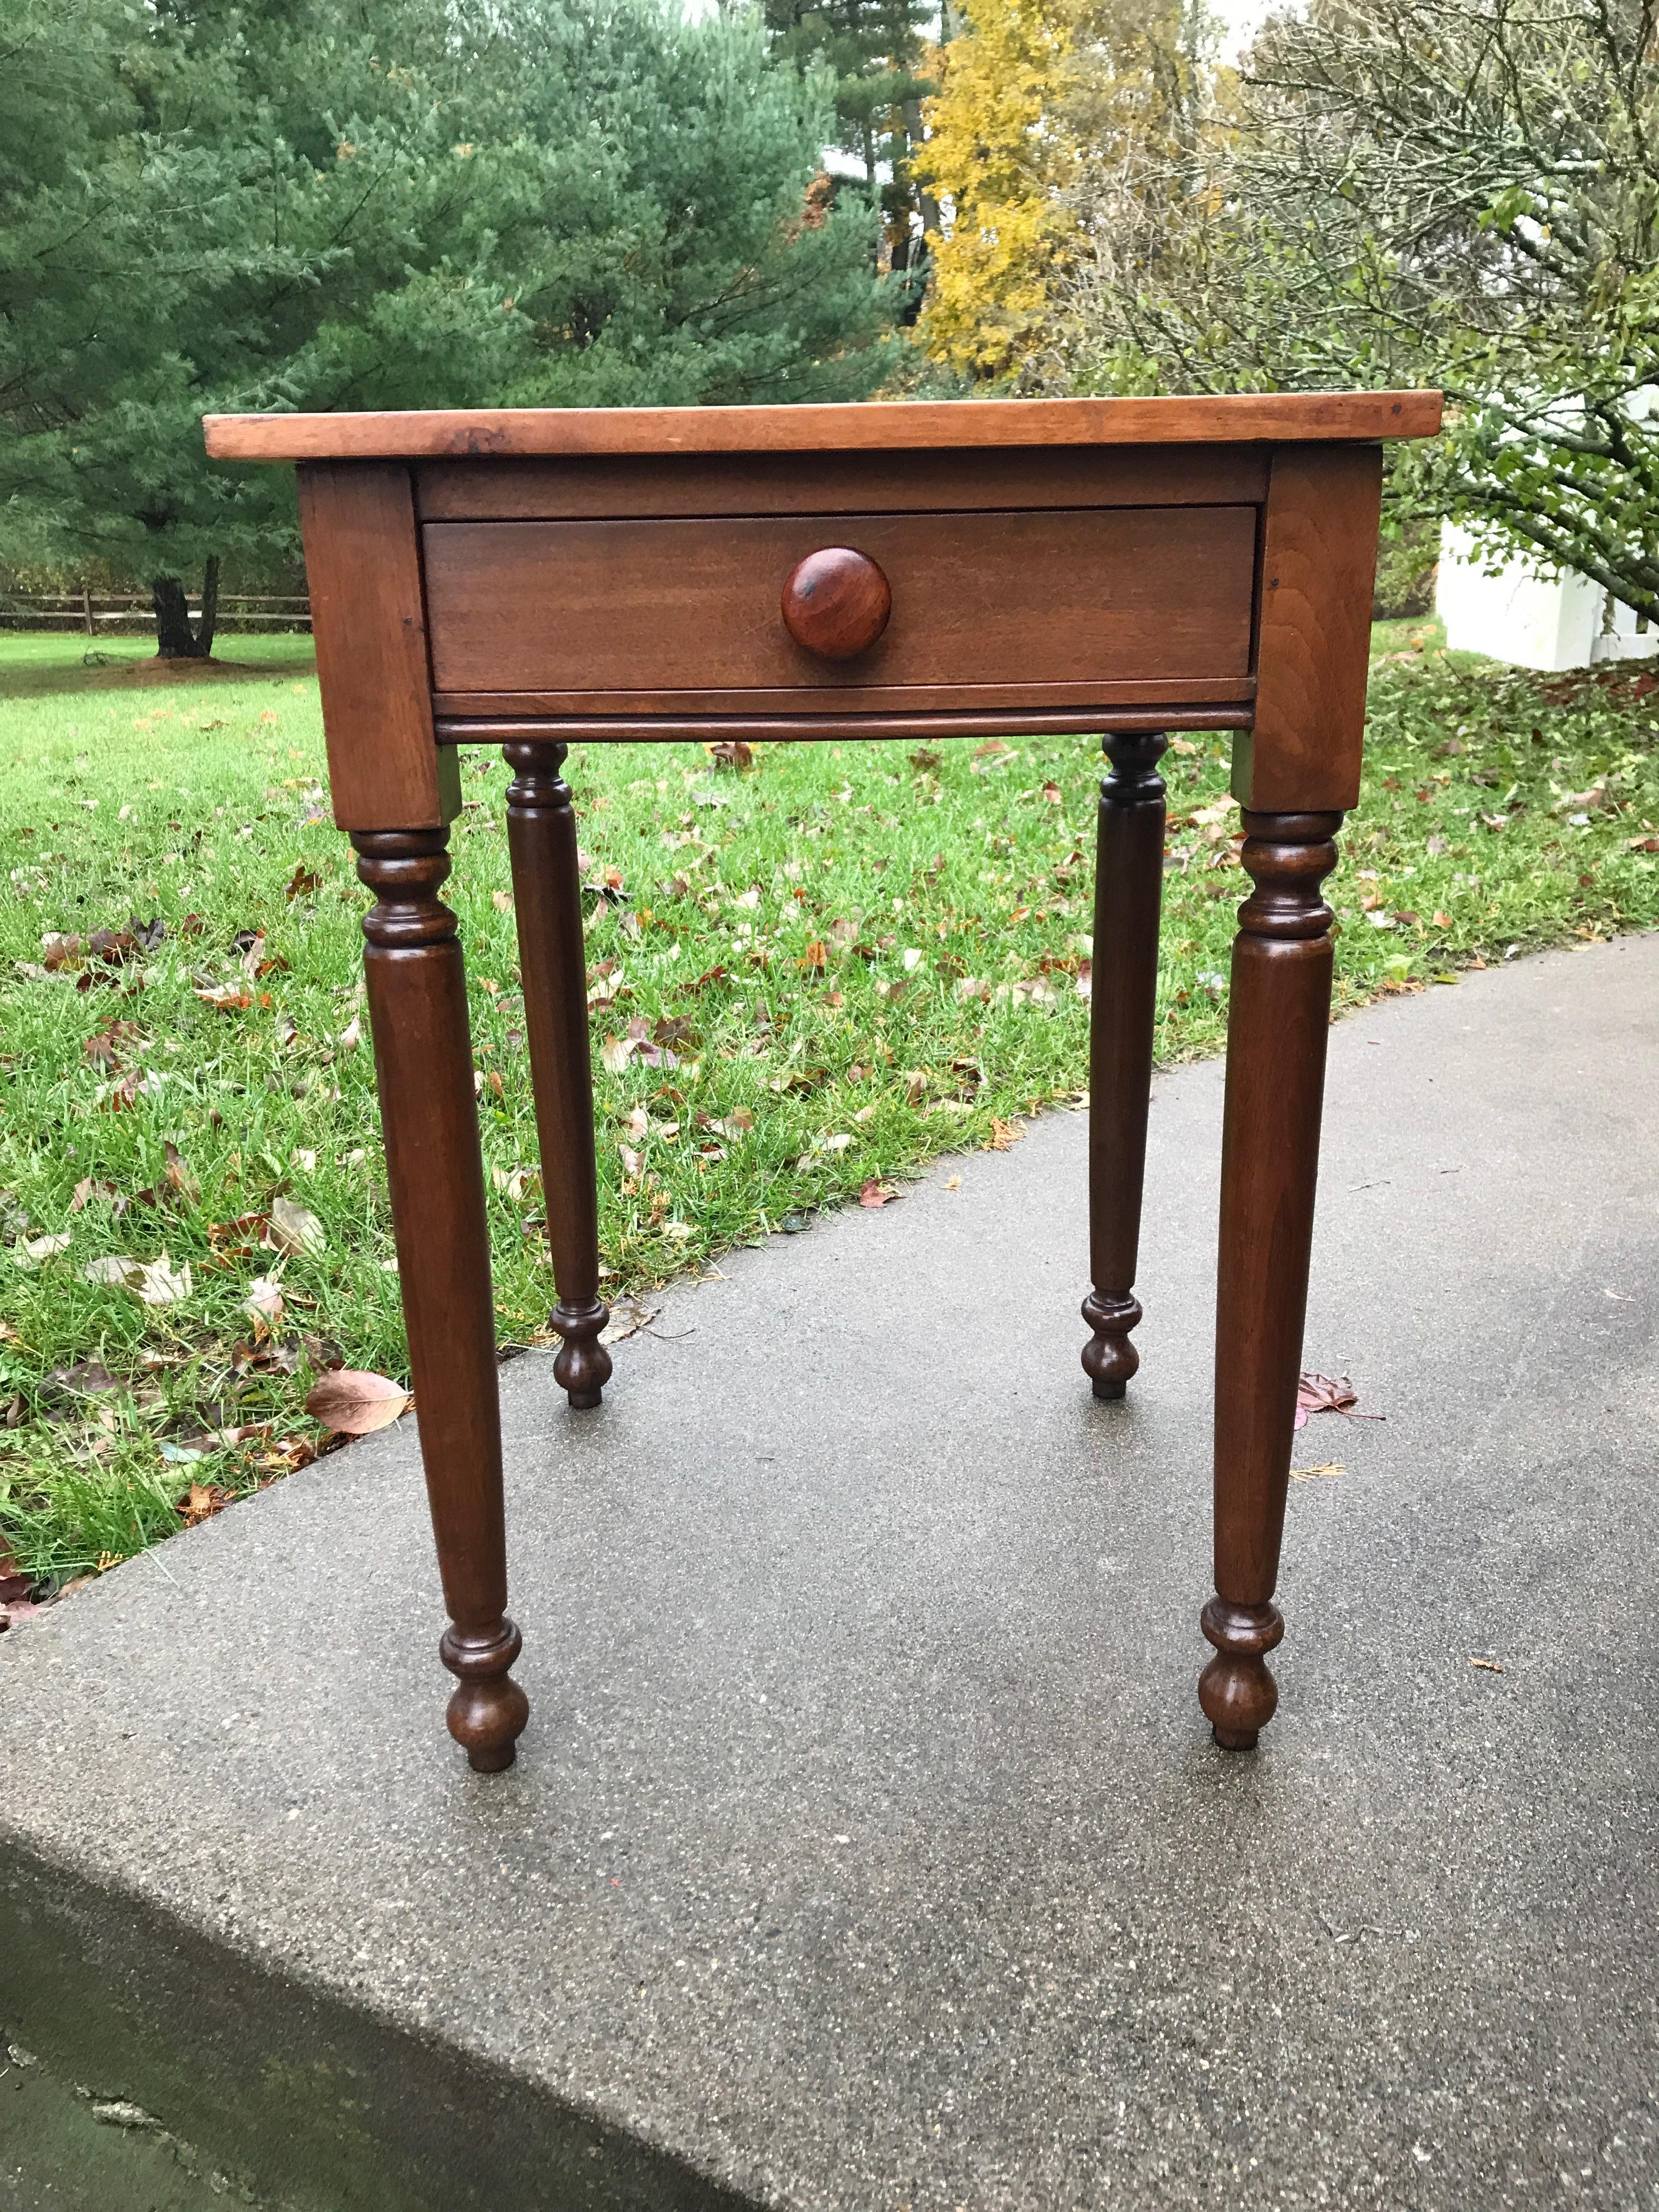 American Sheraton one drawer stand in walnut. circa 1820, Concord, Ma
Dovetailed drawer, wooden knob pull. Measures: 21